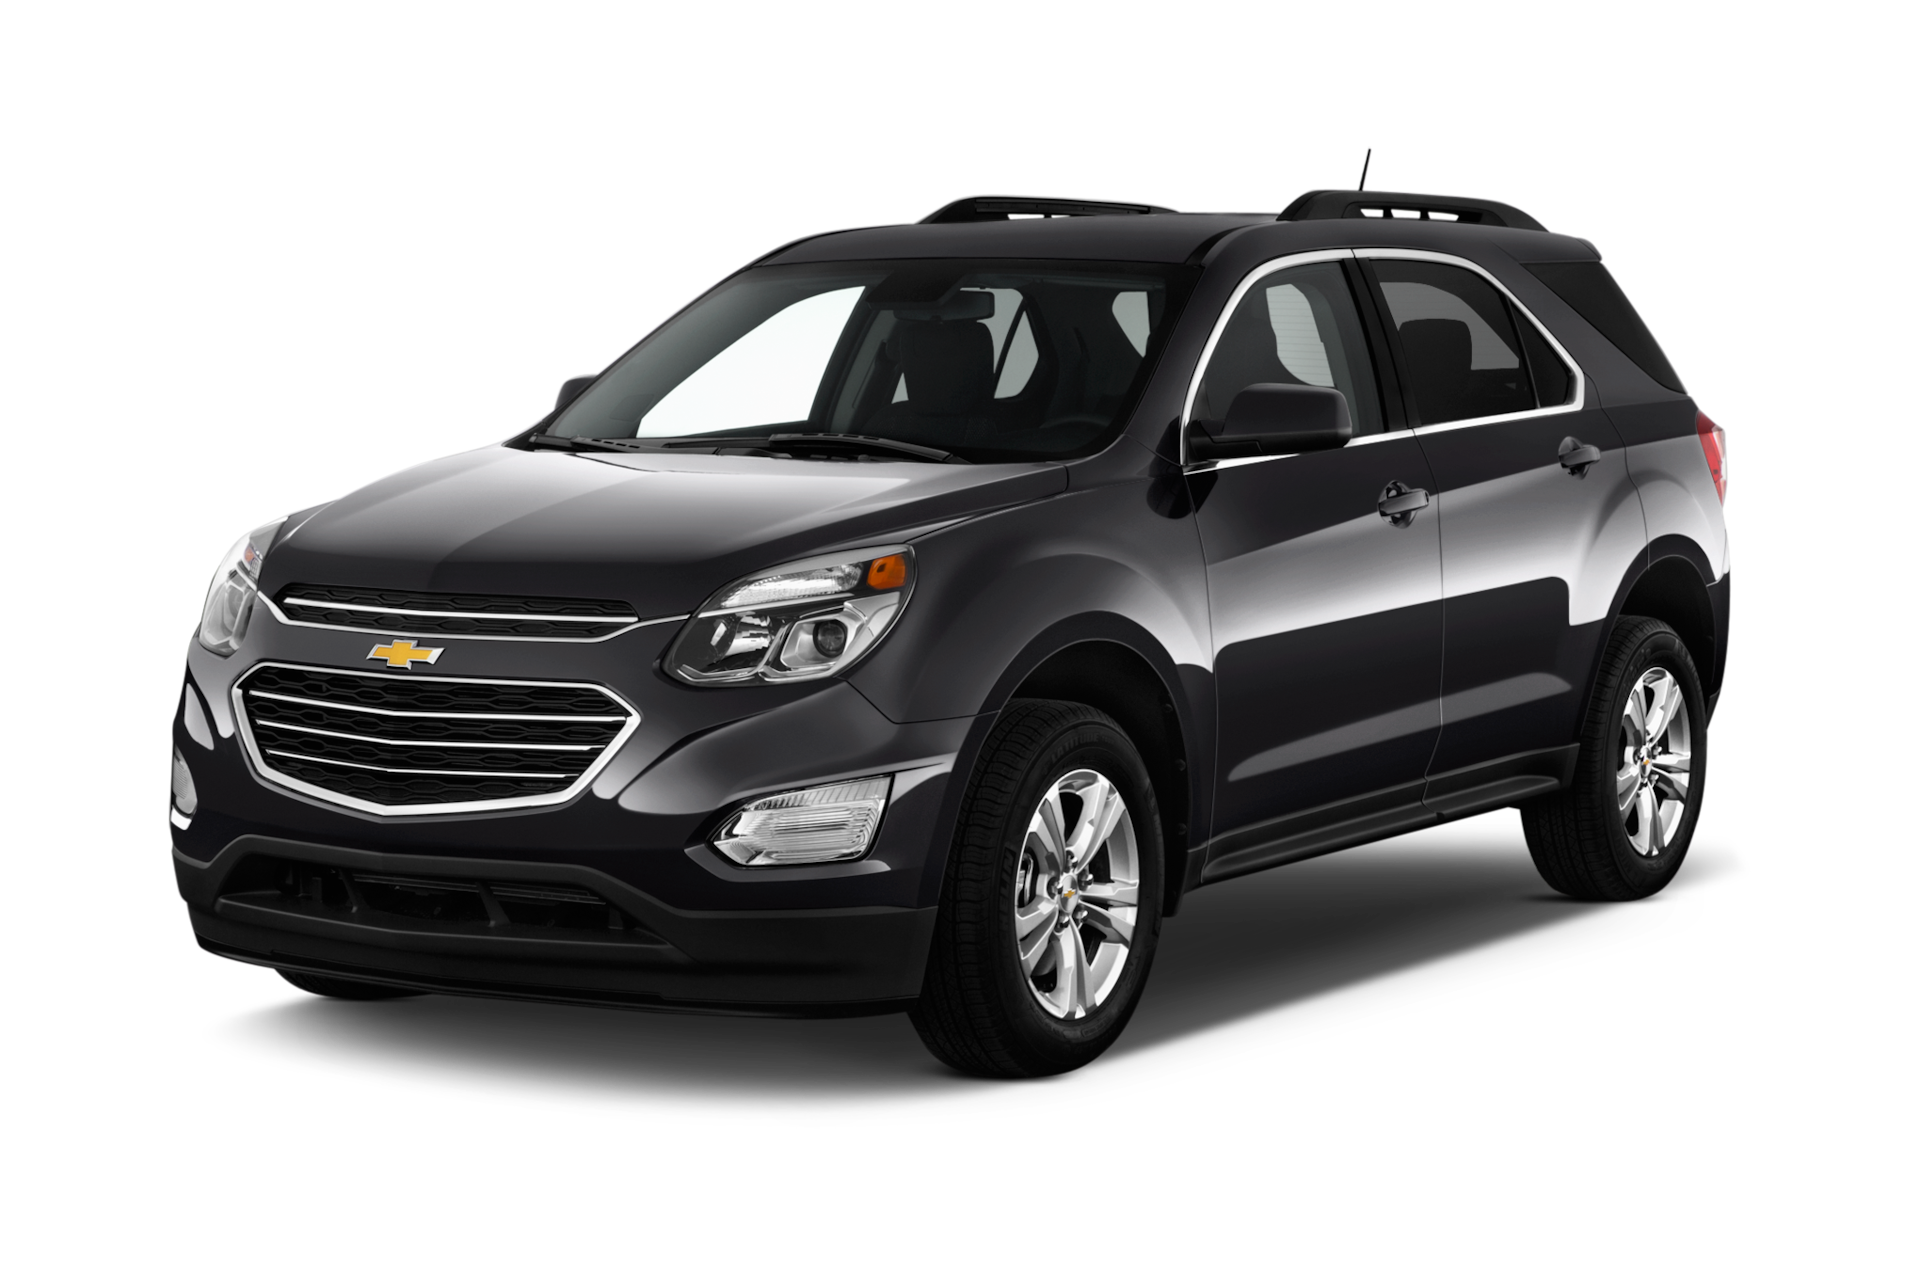 2017 Chevrolet Equinox Prices, Reviews, and Photos - MotorTrend